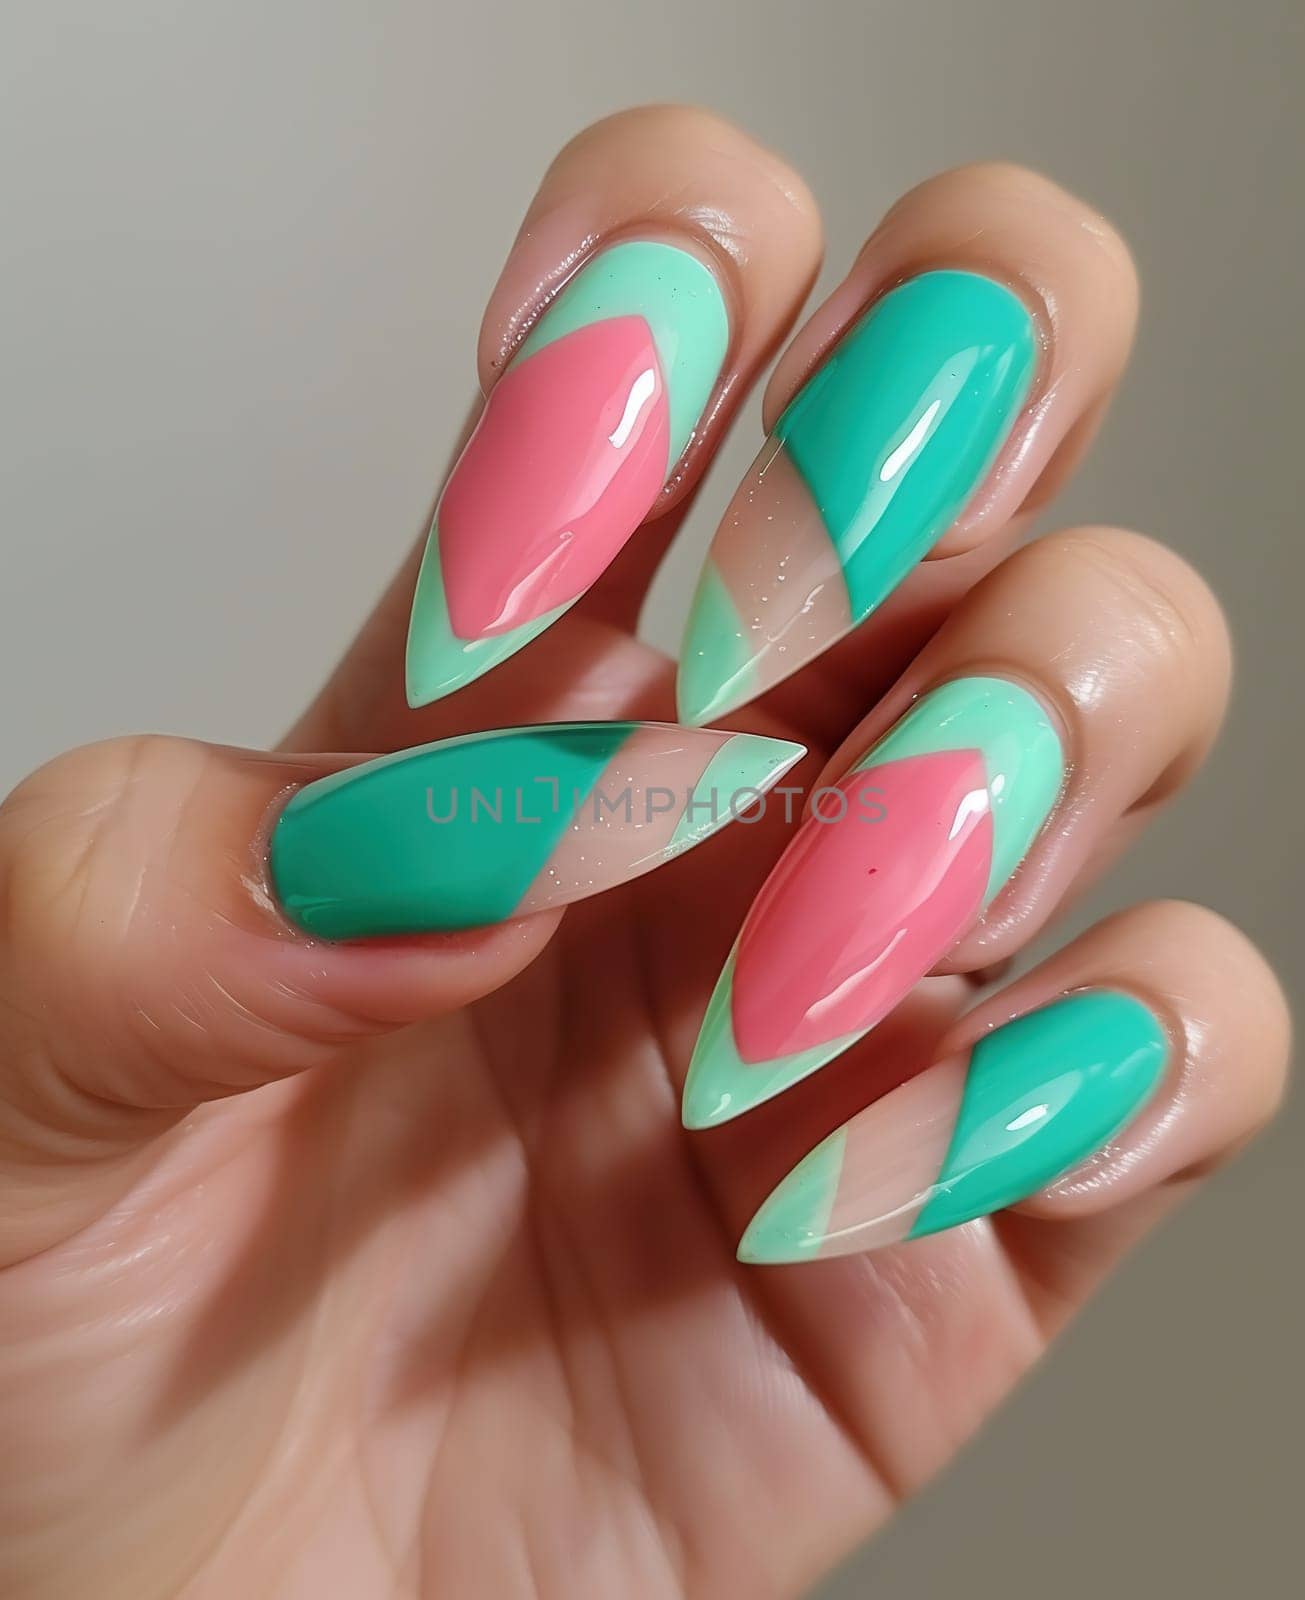 Female hand with long nails and bright green manicure with bottles of nail polish by Andelov13